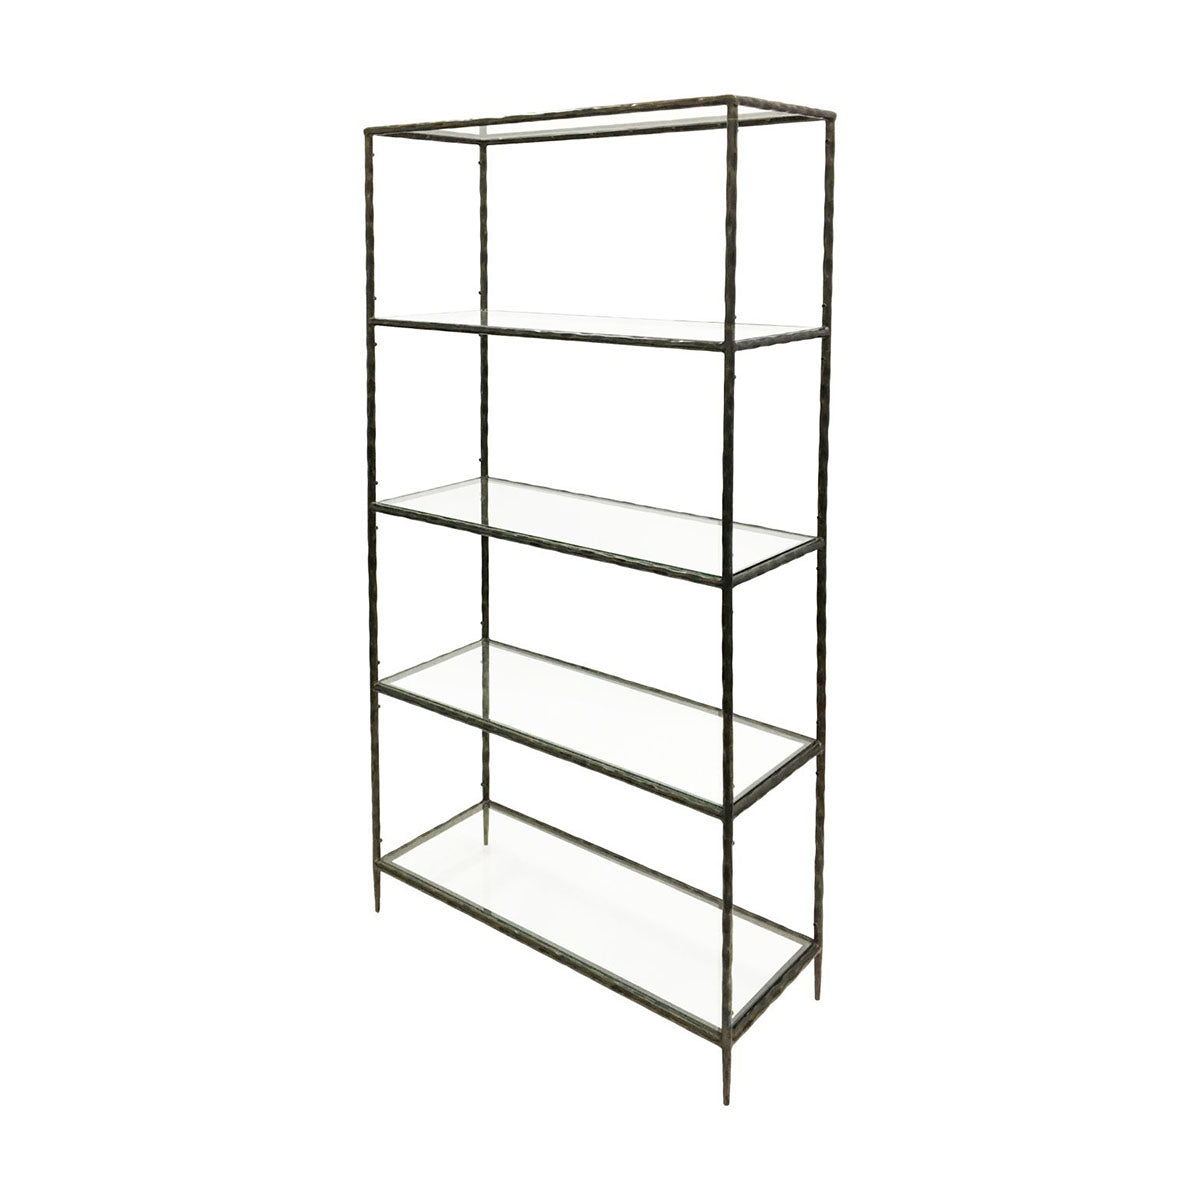 Patterdale Hand Forged Shelving Unit Table Dark Bronze with Glass Shelves